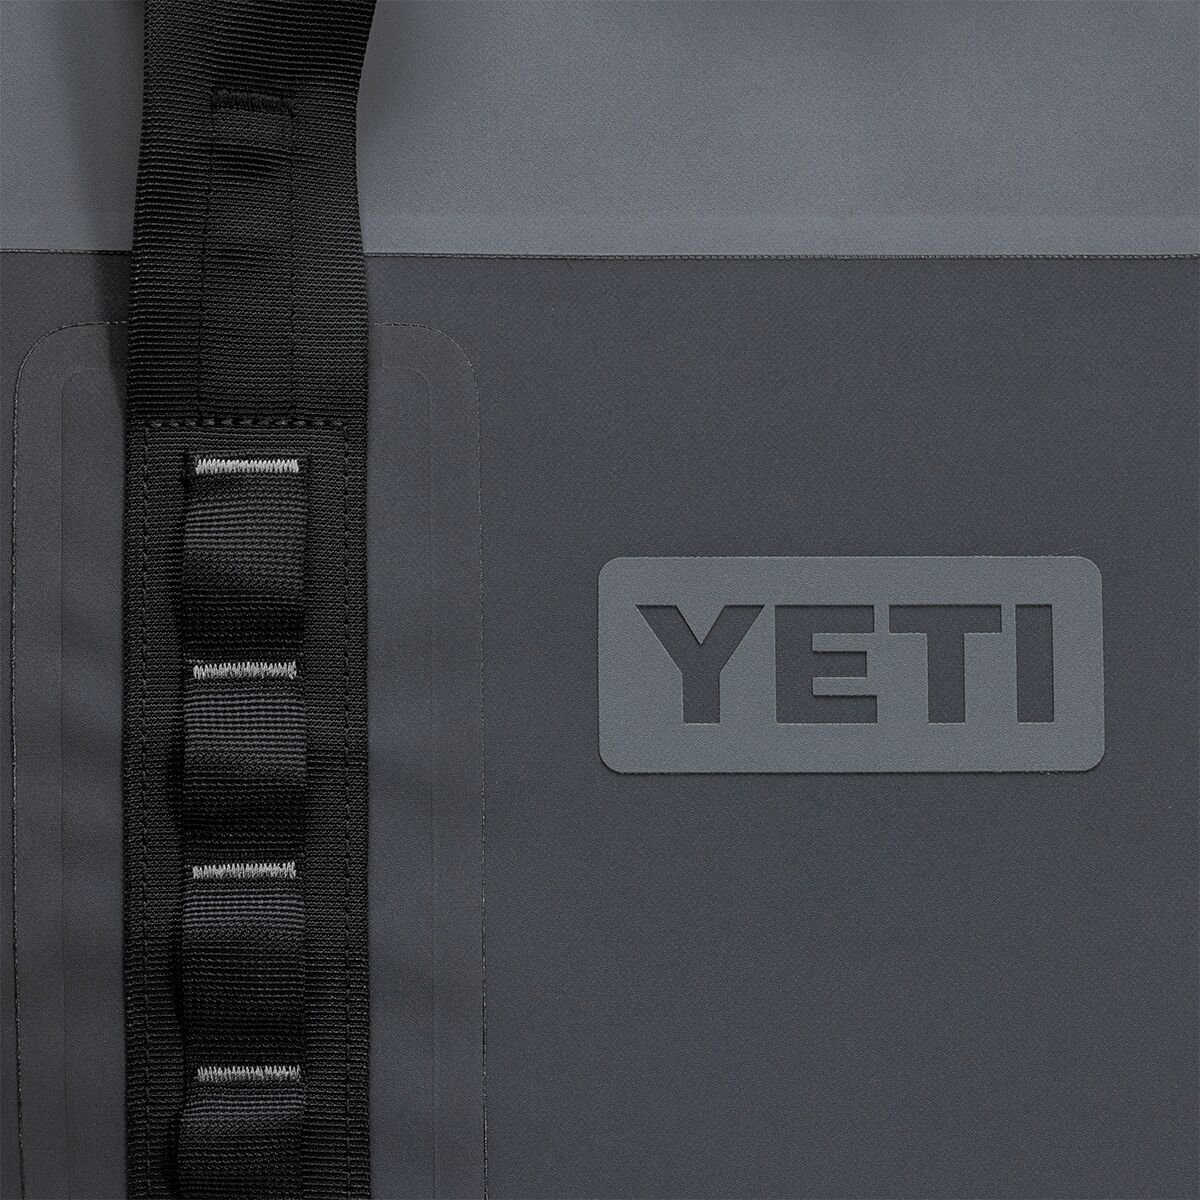 Yeti Hopper M30  The Next Wave In Soft Coolers 